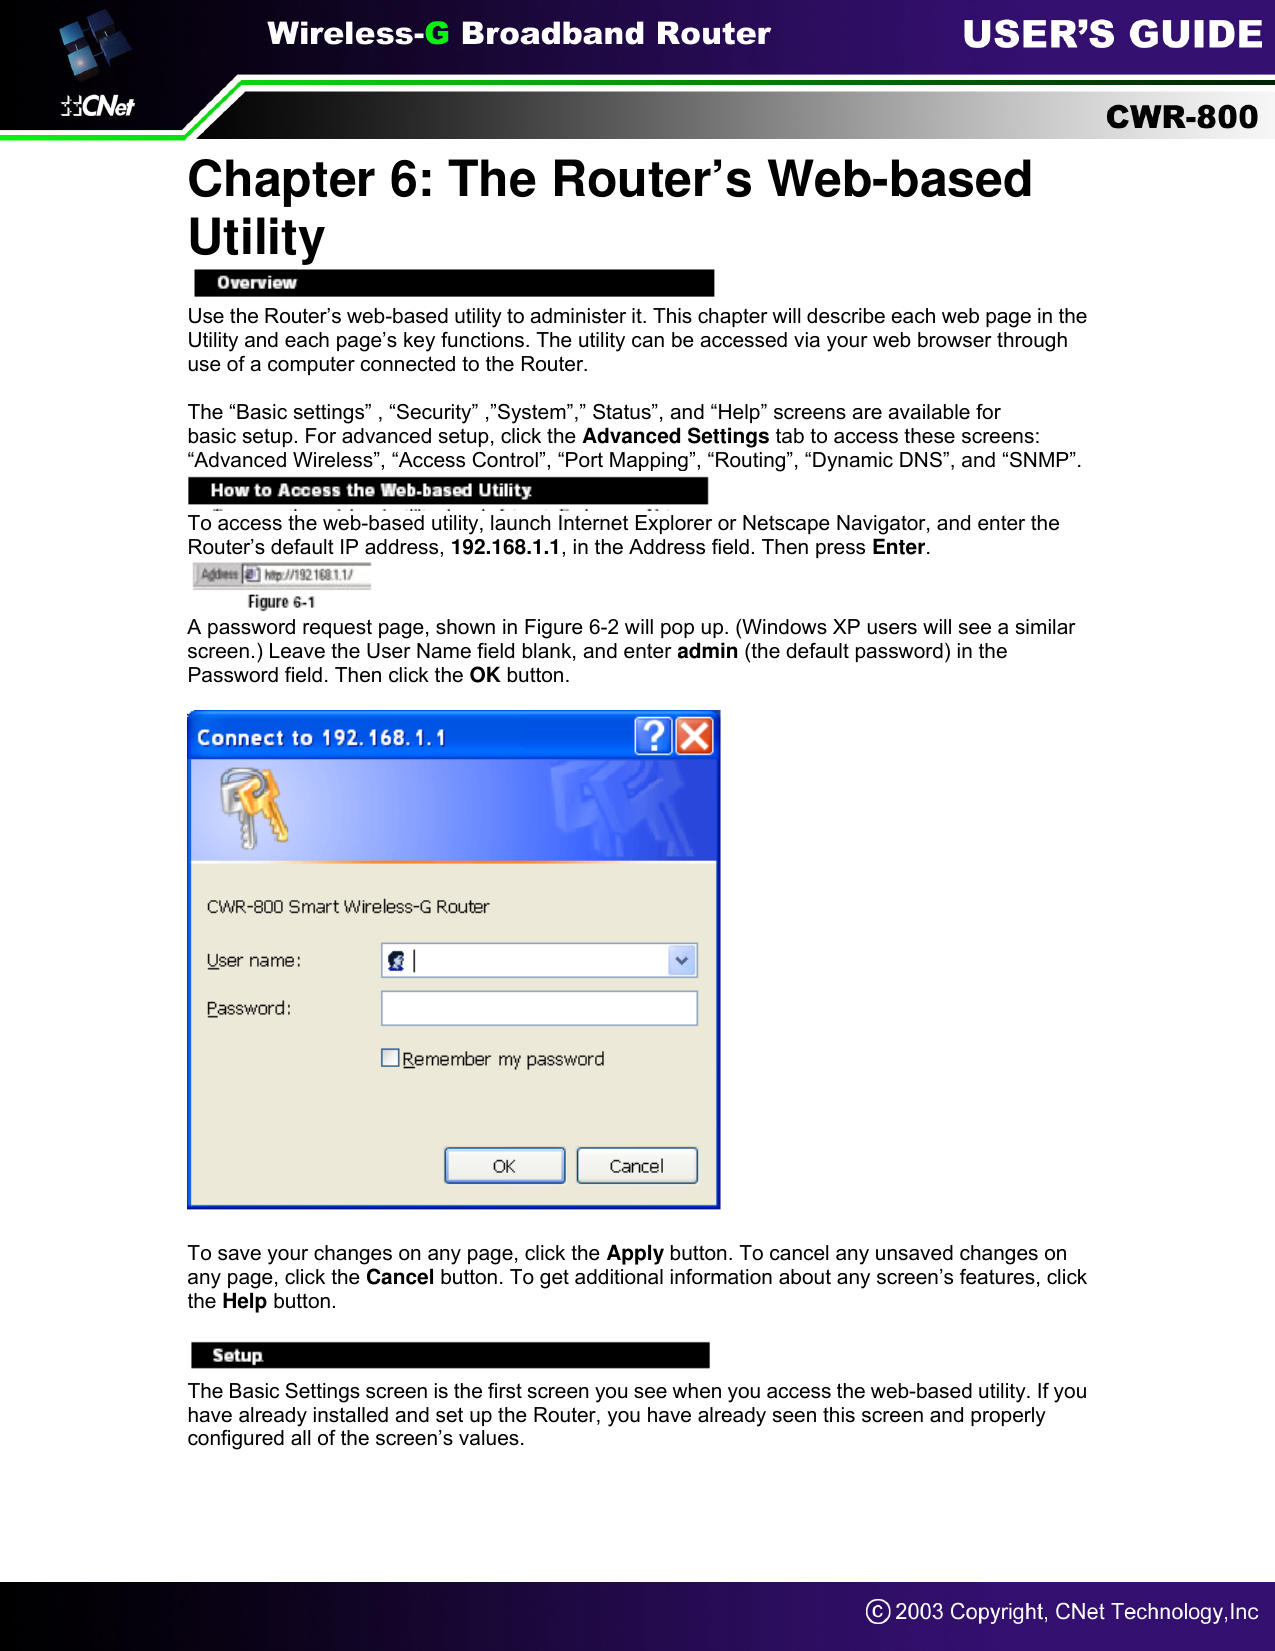 Chapter 6: The Router’s Web-based Utility  Use the Router’s web-based utility to administer it. This chapter will describe each web page in the Utility and each page’s key functions. The utility can be accessed via your web browser through use of a computer connected to the Router.  The “Basic settings” , “Security” ,”System”,” Status”, and “Help” screens are available for basic setup. For advanced setup, click the Advanced Settings tab to access these screens: “Advanced Wireless”, “Access Control”, “Port Mapping”, “Routing”, “Dynamic DNS”, and “SNMP”.  To access the web-based utility, launch Internet Explorer or Netscape Navigator, and enter the Router’s default IP address, 192.168.1.1, in the Address field. Then press Enter.  A password request page, shown in Figure 6-2 will pop up. (Windows XP users will see a similar screen.) Leave the User Name field blank, and enter admin (the default password) in the Password field. Then click the OK button.    To save your changes on any page, click the Apply button. To cancel any unsaved changes on any page, click the Cancel button. To get additional information about any screen’s features, click the Help button.  Overview The Basic Settings screen is the first screen you see when you access the web-based utility. If you have already installed and set up the Router, you have already seen this screen and properly configured all of the screen’s values.     